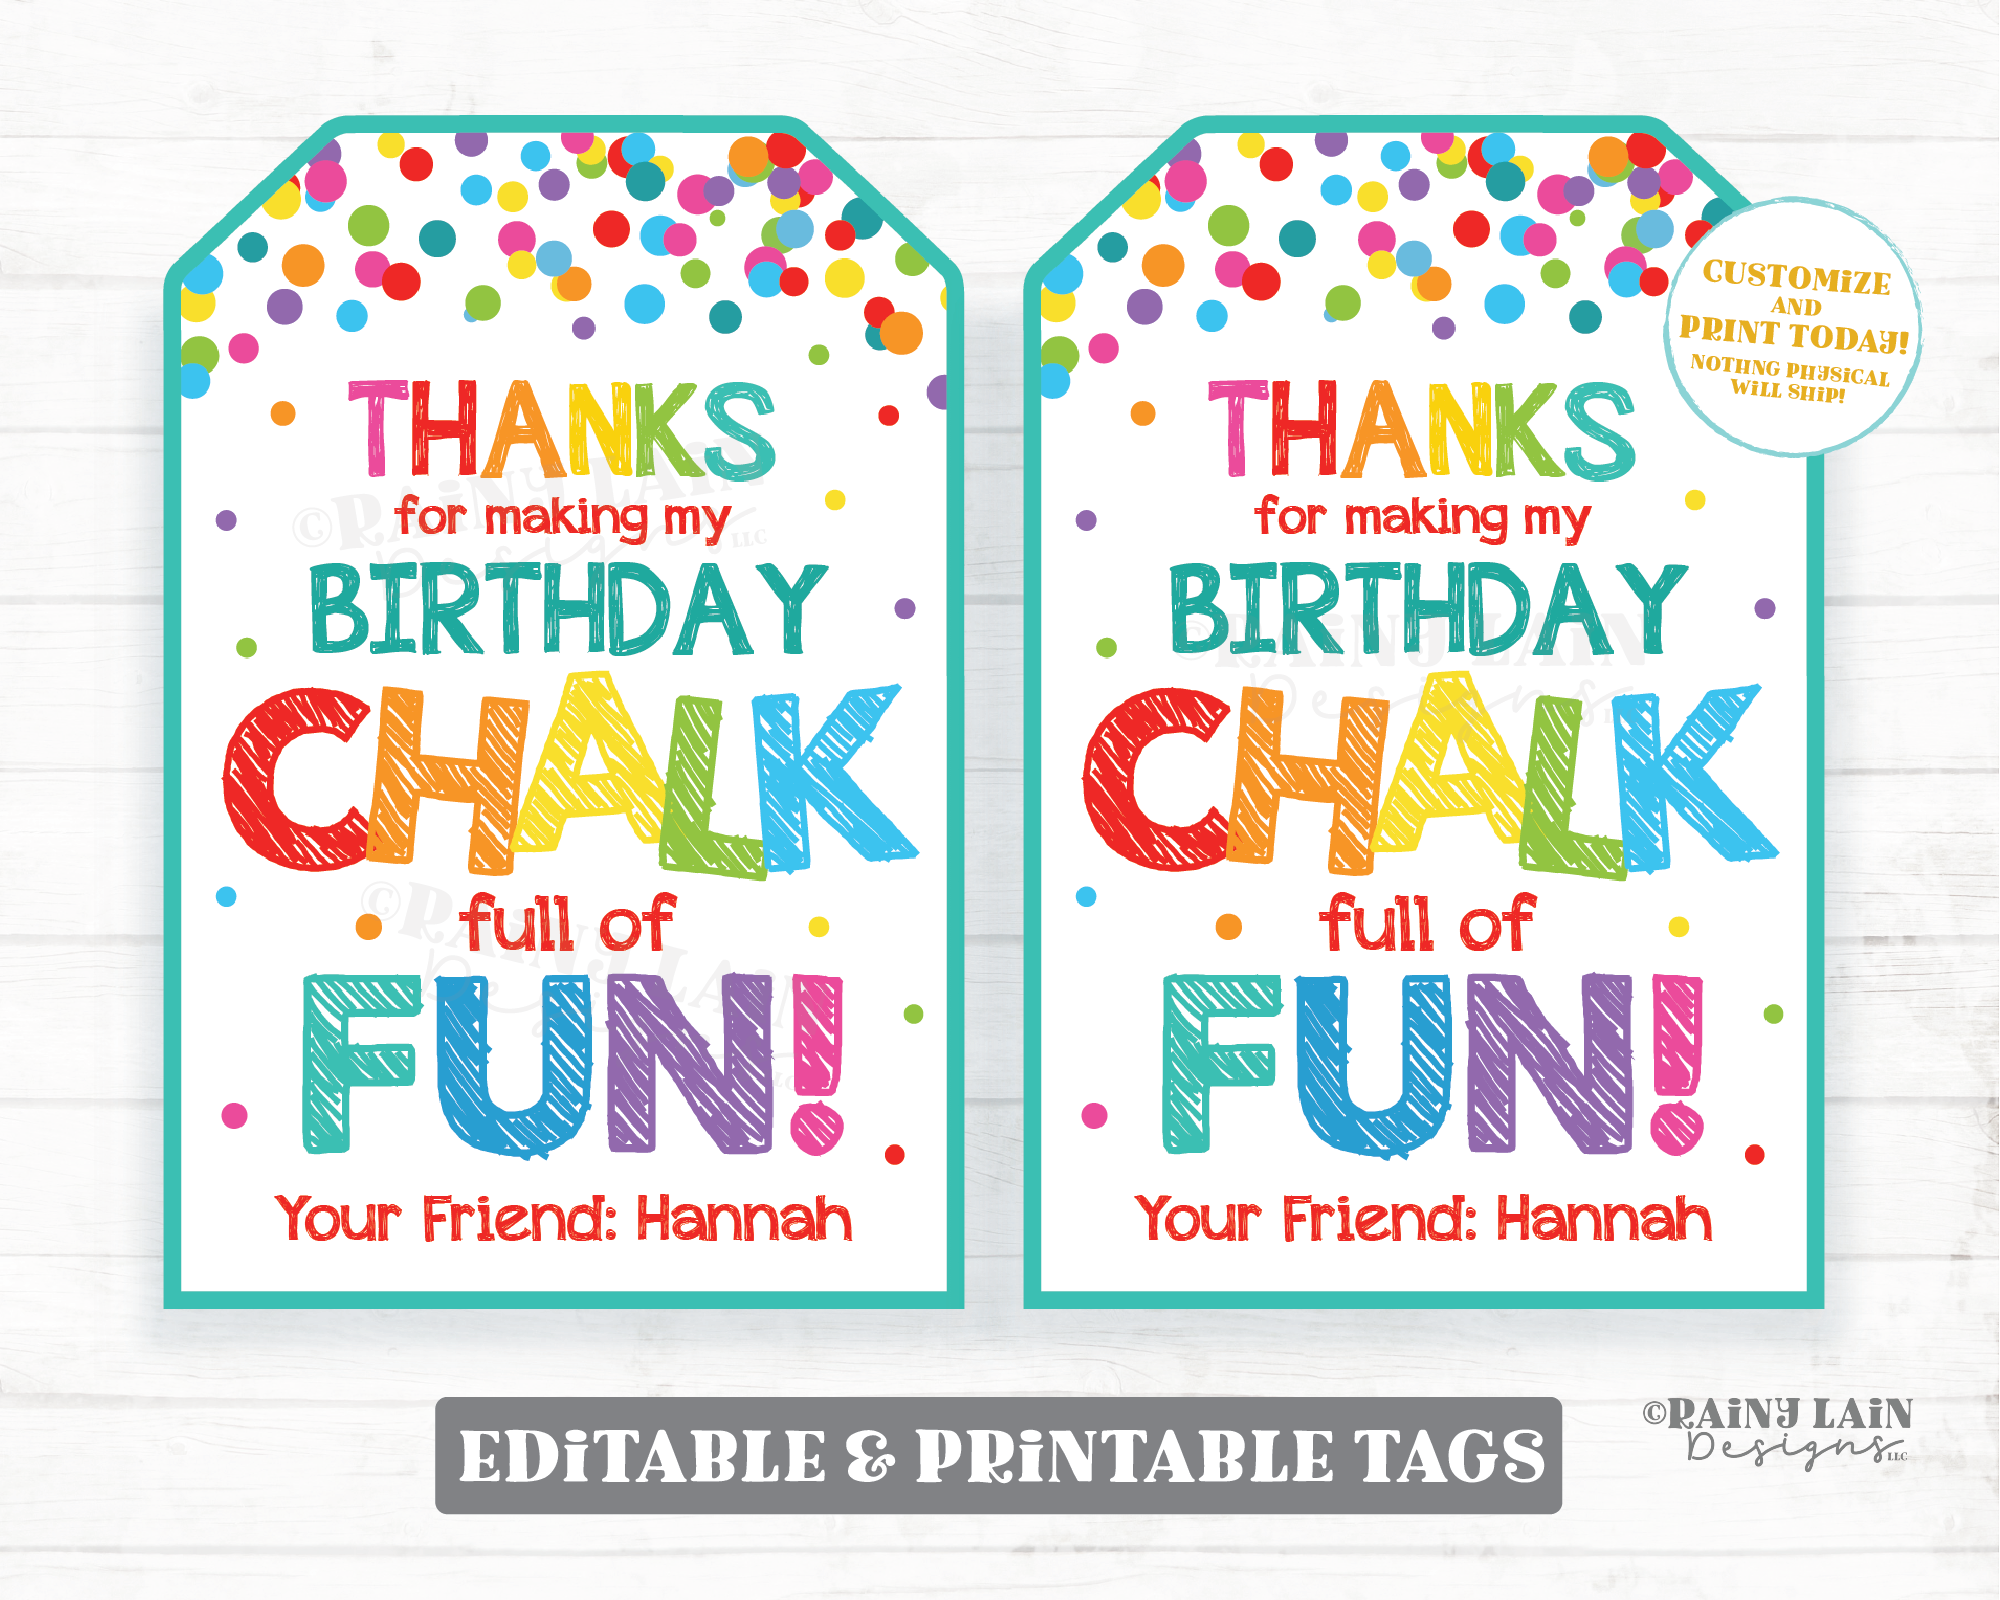 Thanks for making my birthday Chalk full of Fun Chalk birthday favor tags sidewalk chalk party favor tags chalk gift tag celebrating with me